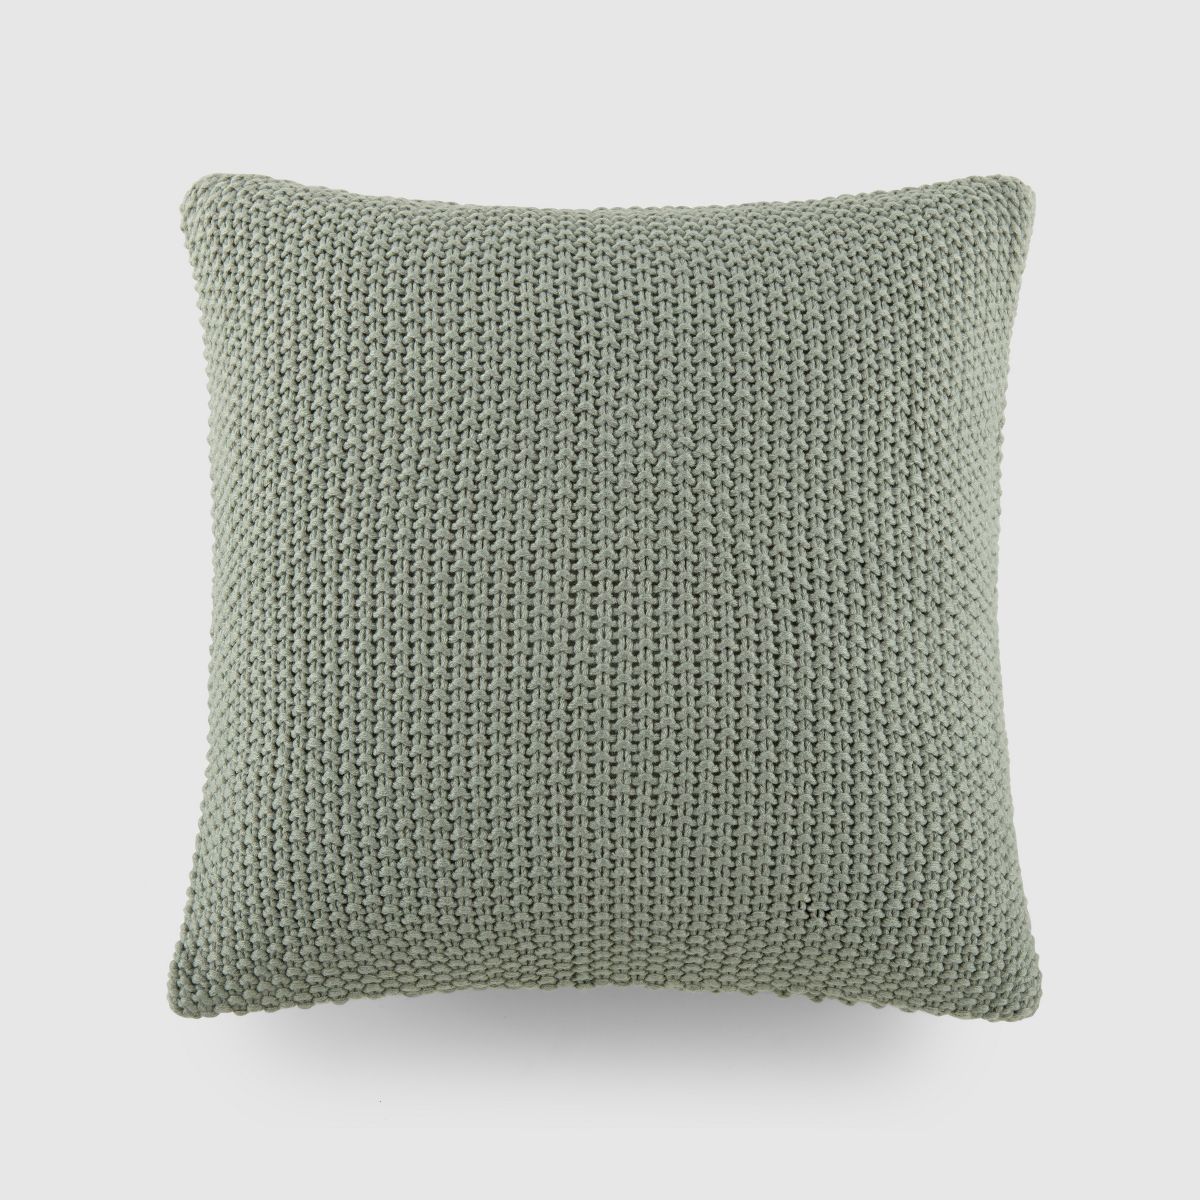 Stitch Knit Throw Pillow Cover And Pillow Insert - Becky Cameron, Eucalyptus, One Size | Target